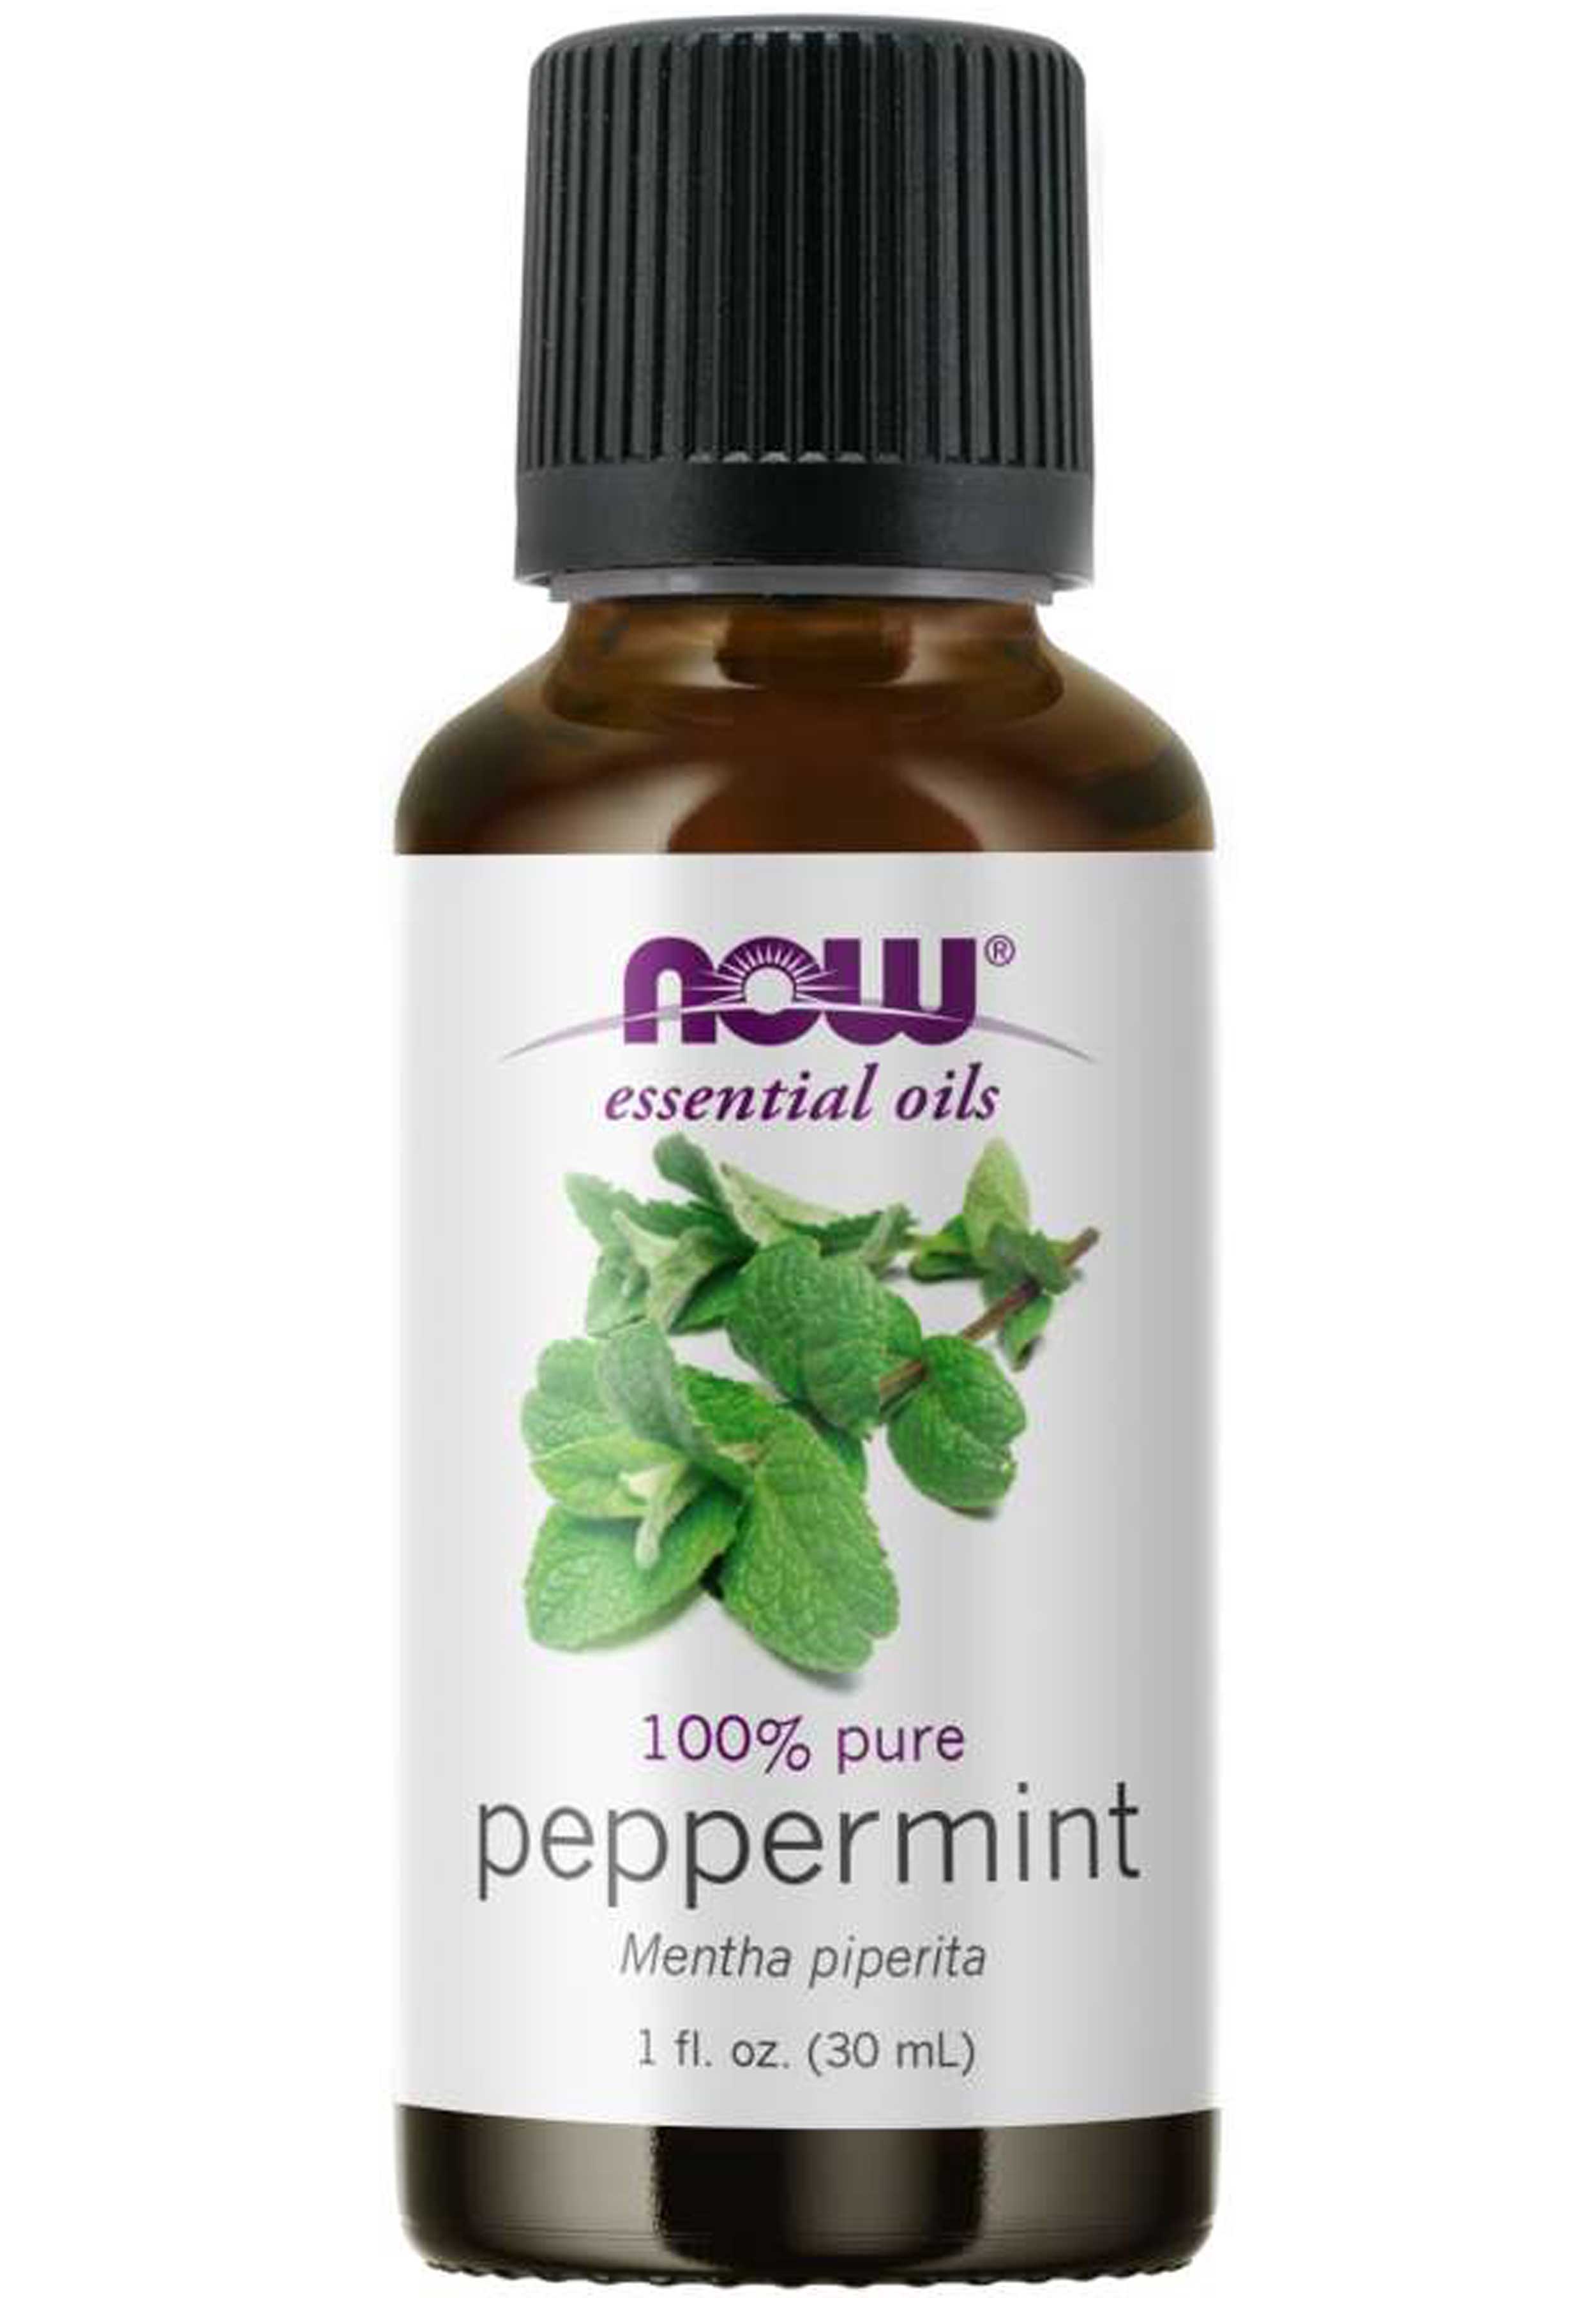 NOW Essential Oils Peppermint Oil